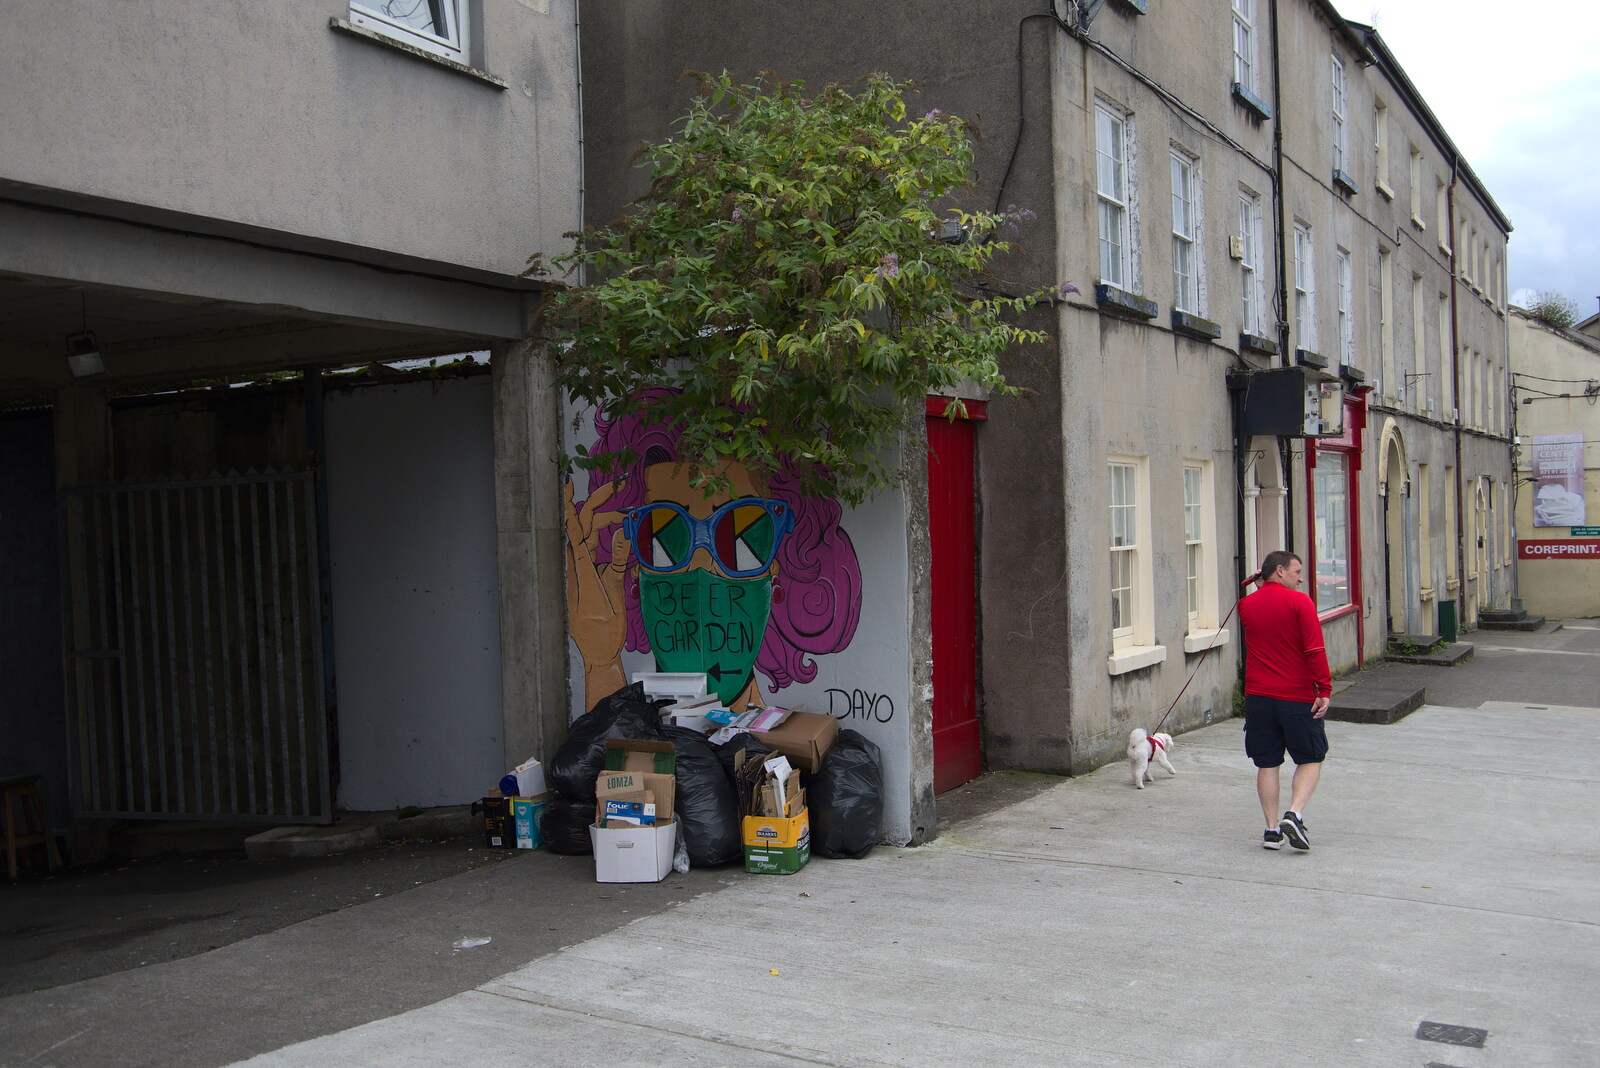 A Trip to Manorhamilton, County Leitrim, Ireland - 11th August 2021: Rubbish and beer-garden graffiti